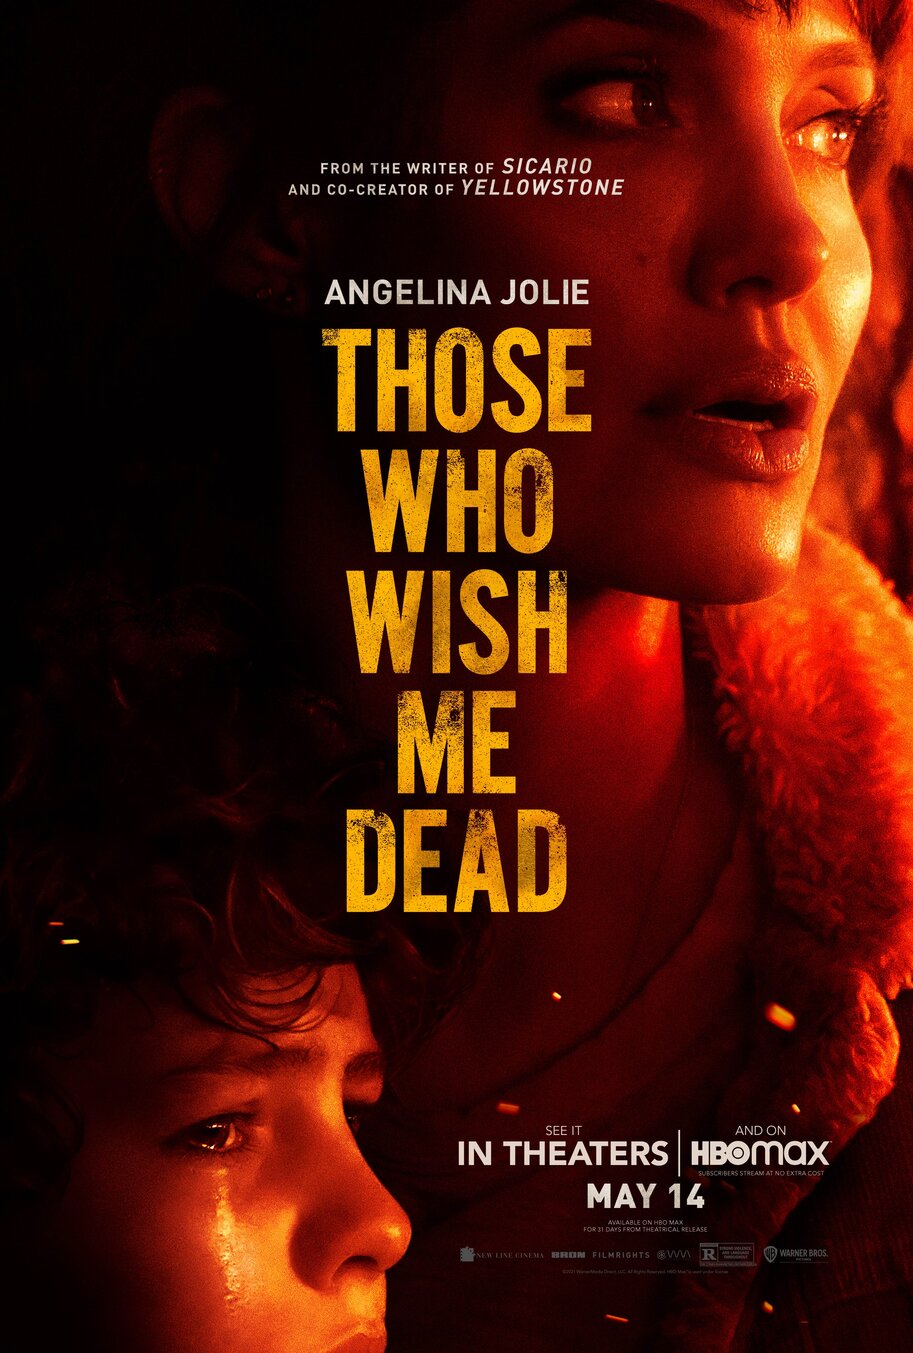 rsz_those-who-wish-me-dead-poster